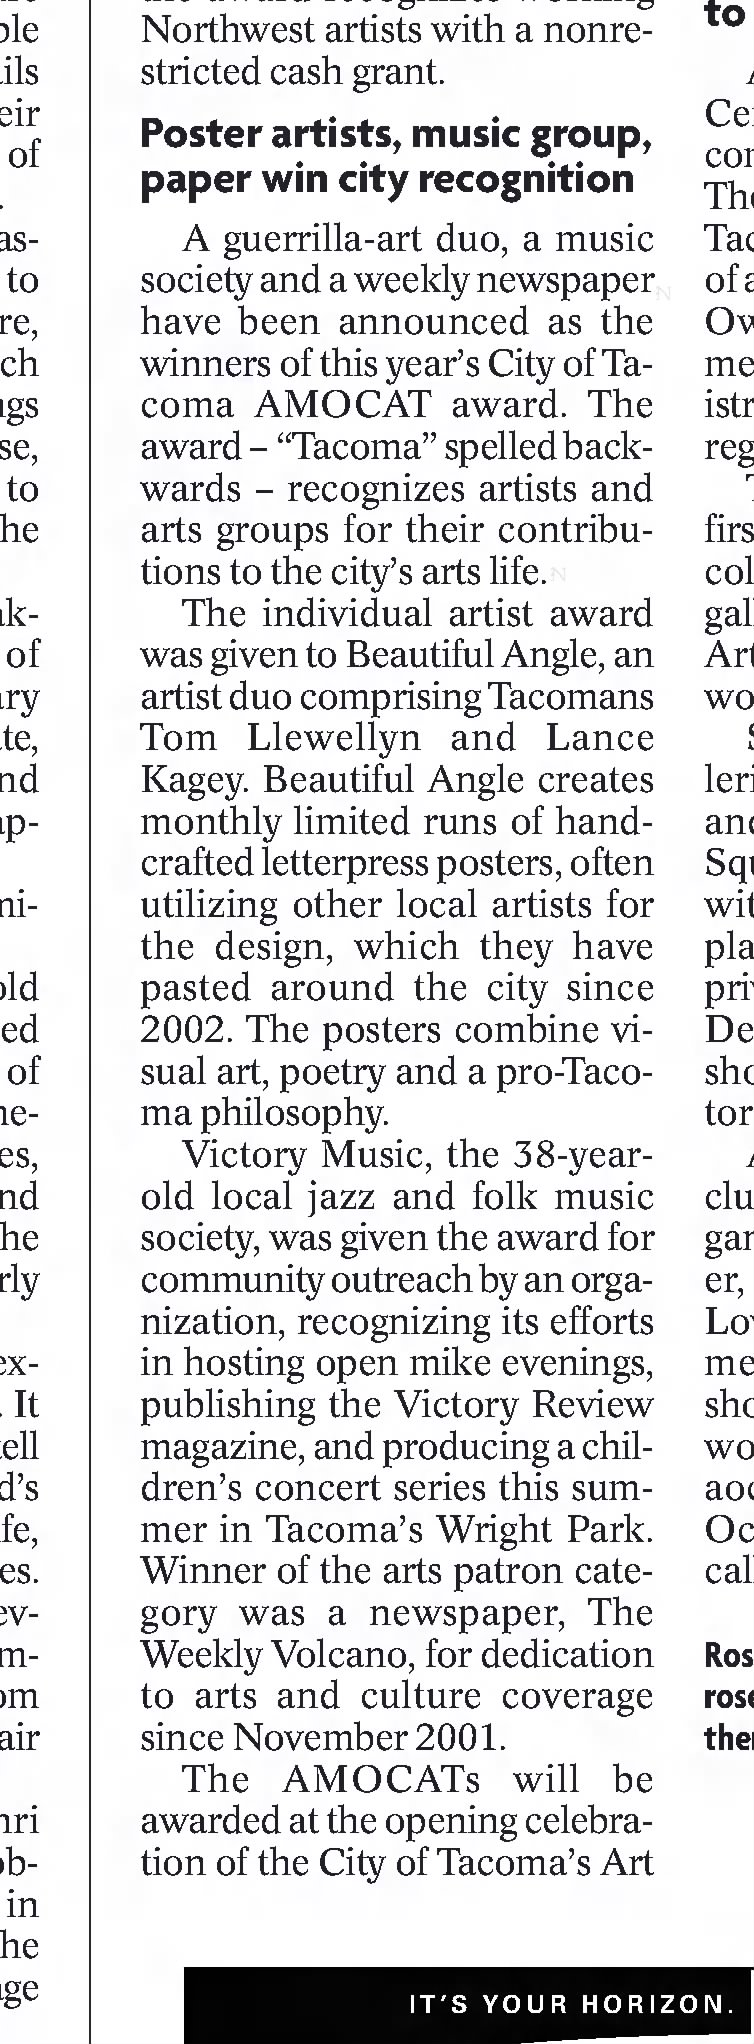 Poster artists, music group, paper win city recognition